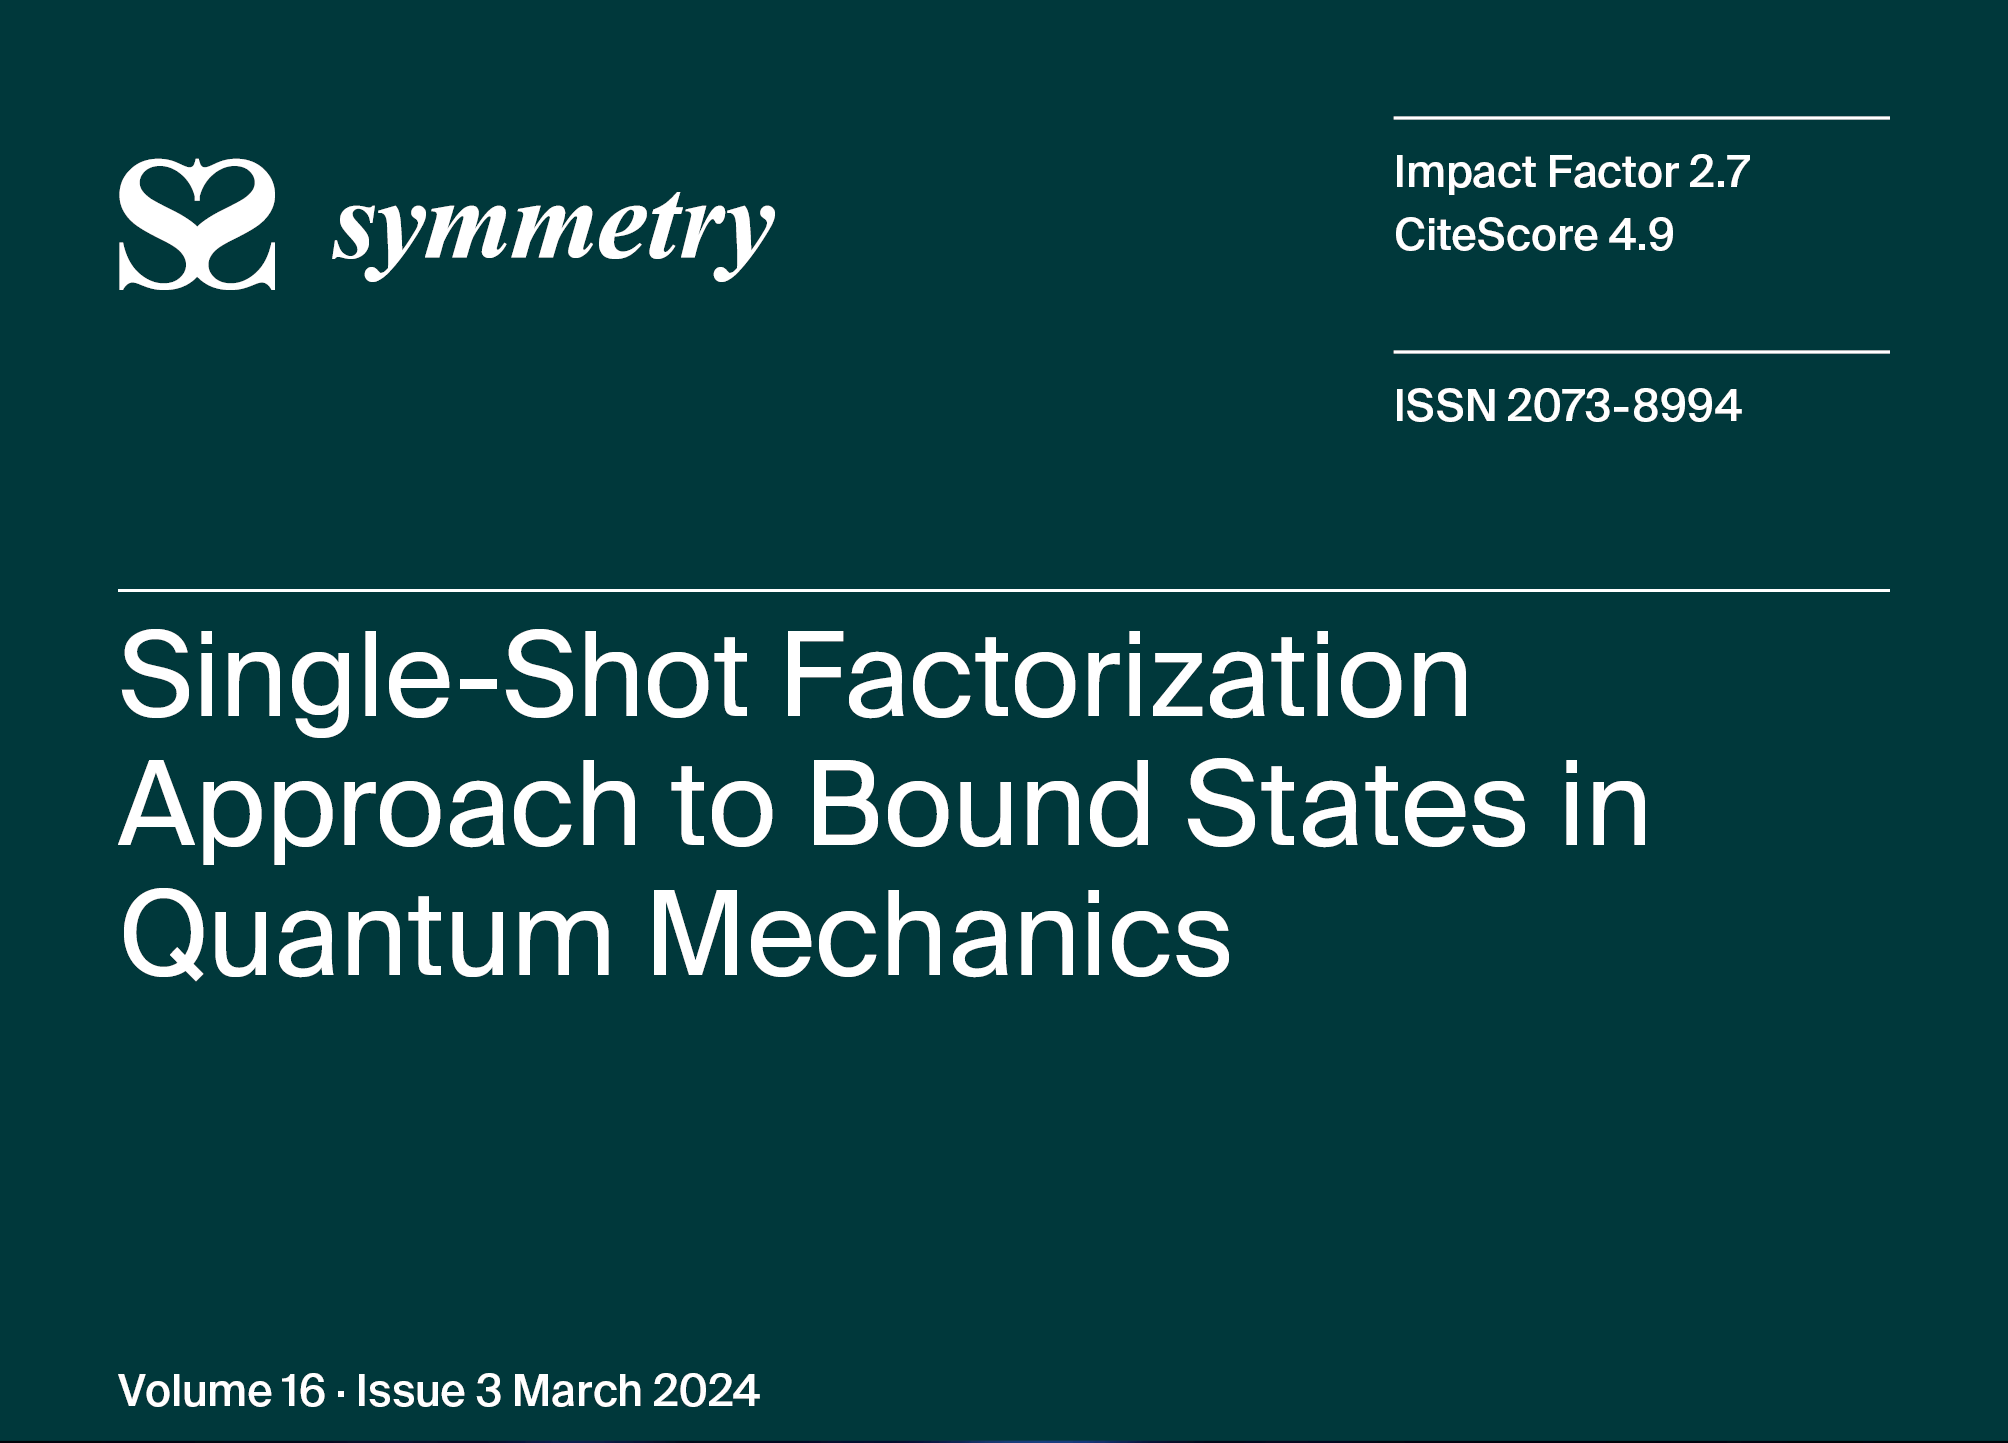 The paper is entitled Single-Shot Factorization Approach to Bound States in Quantum Mechanics and was published in Symmetry.